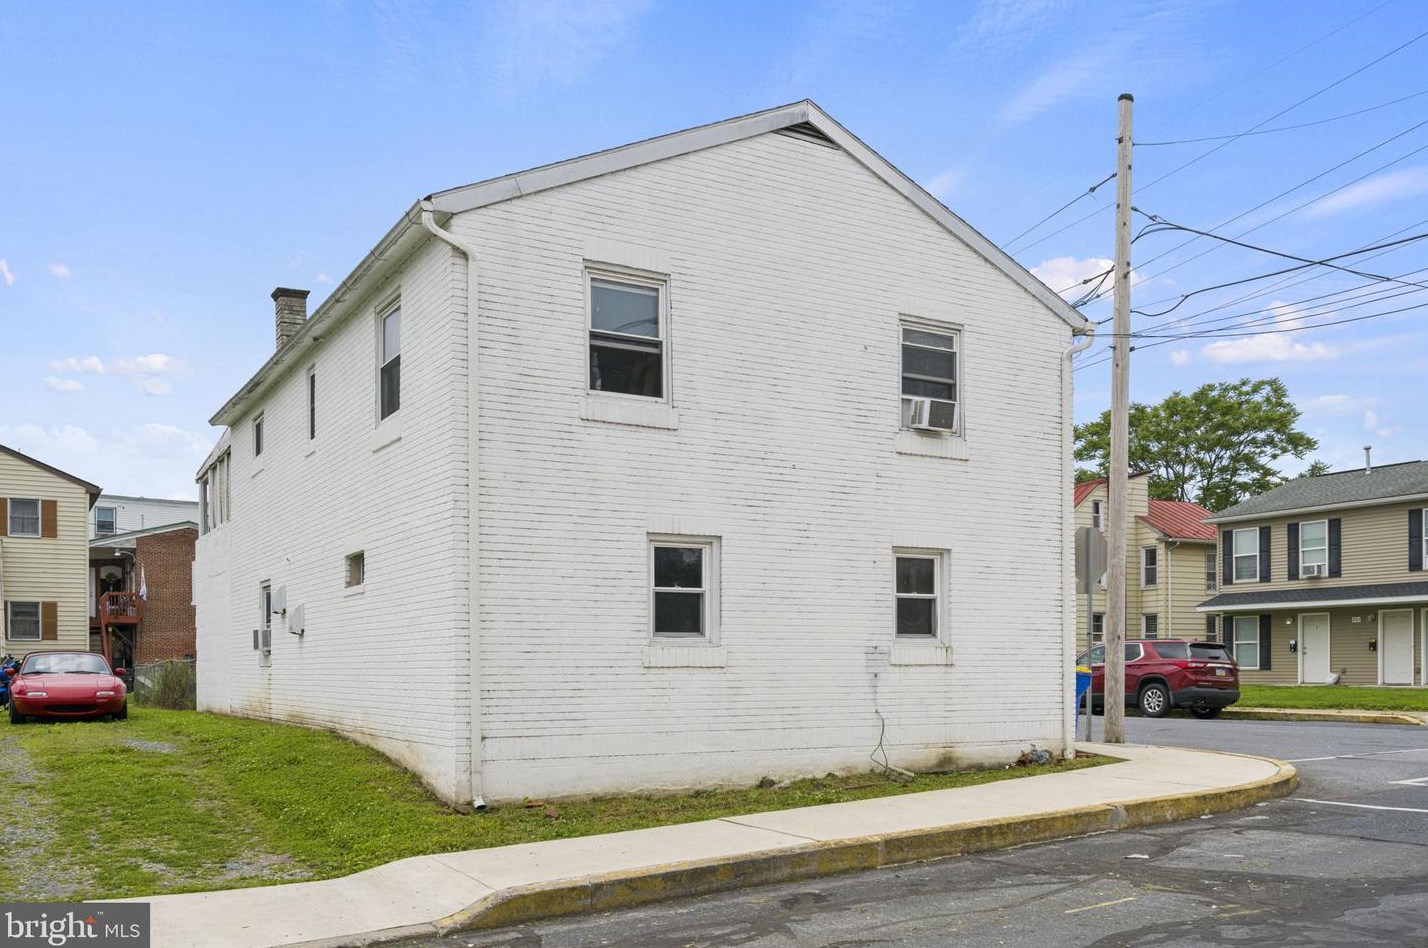 202 S Lawrence St, Hbg Inter Airp, PA 17057